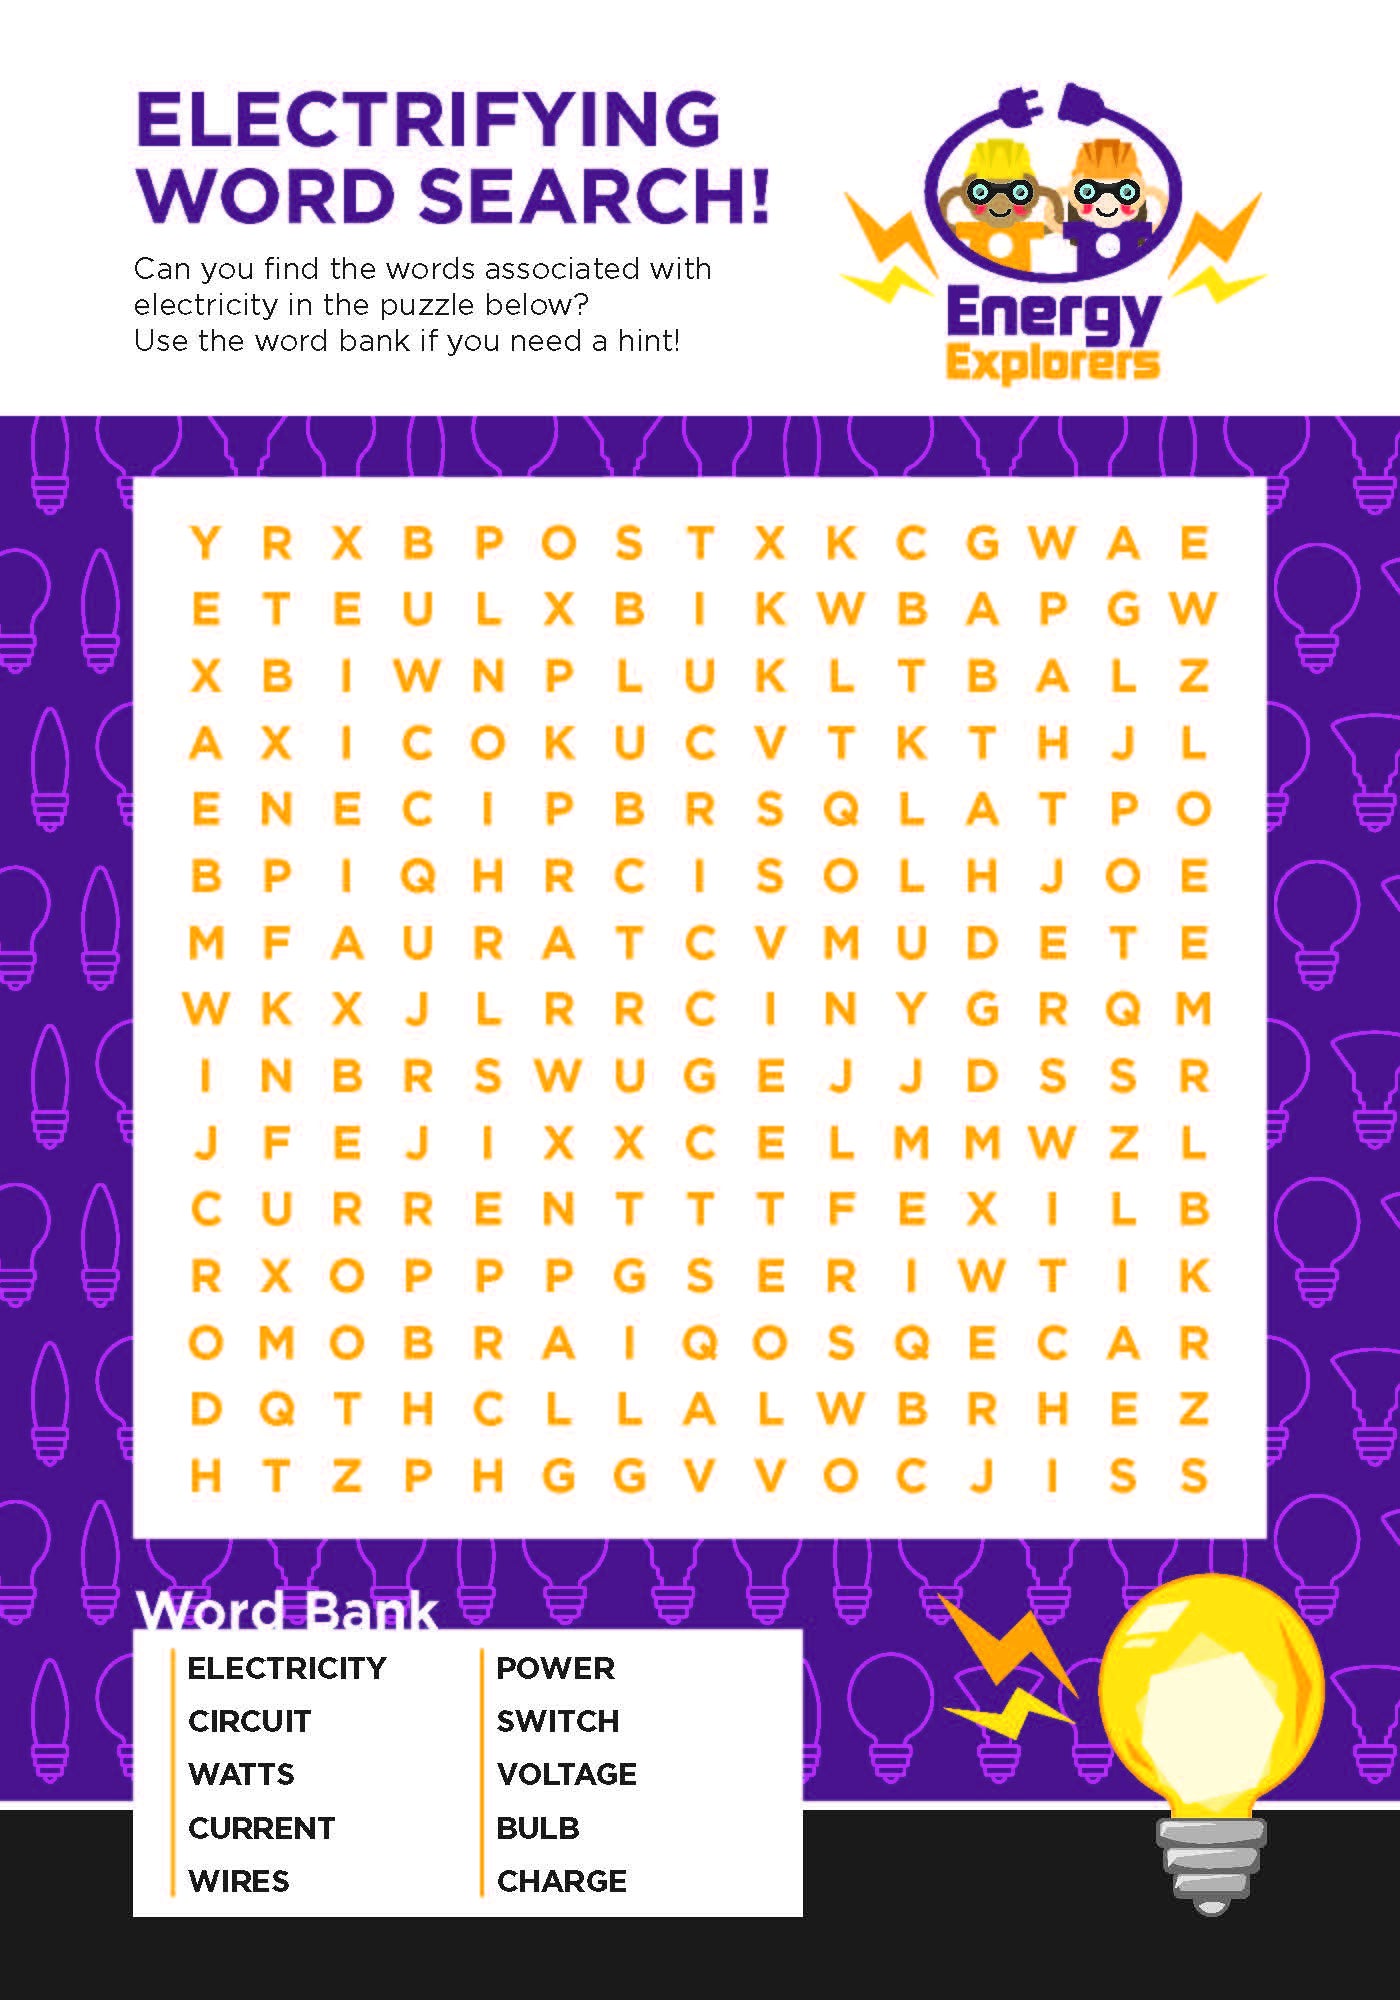 Electrifying Word Search